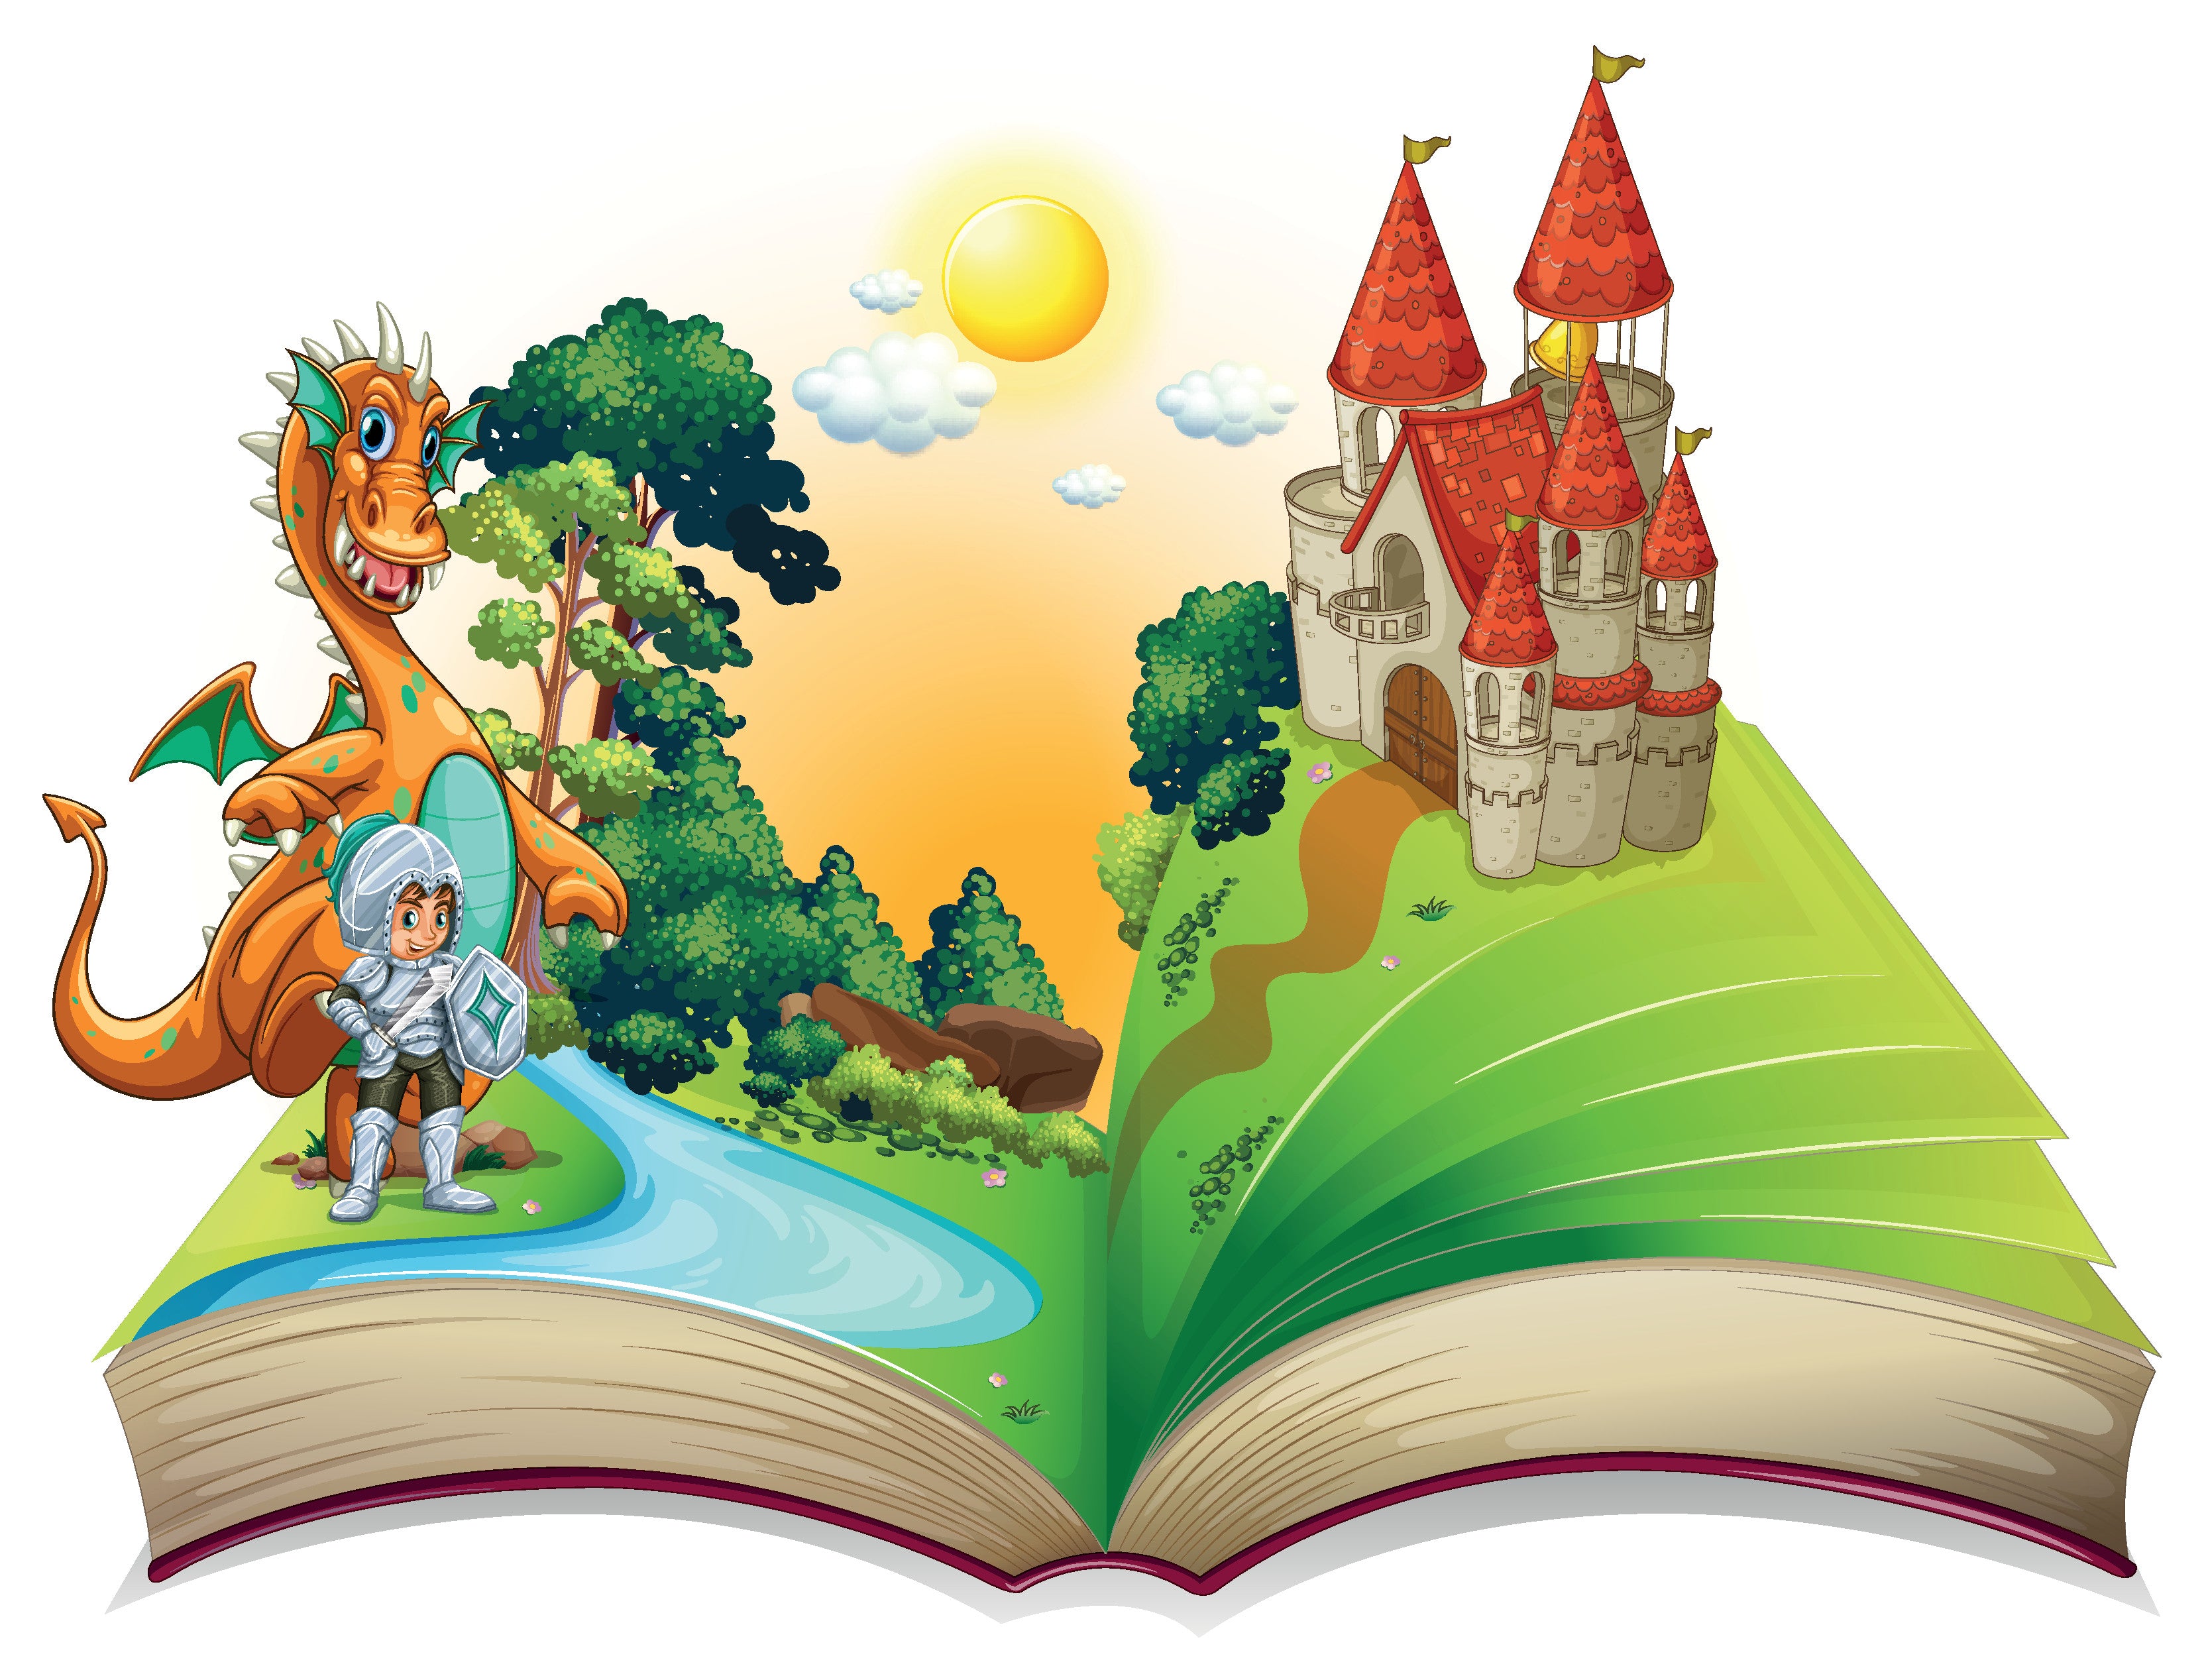 Do you need to hire an illustrator for your picture book?